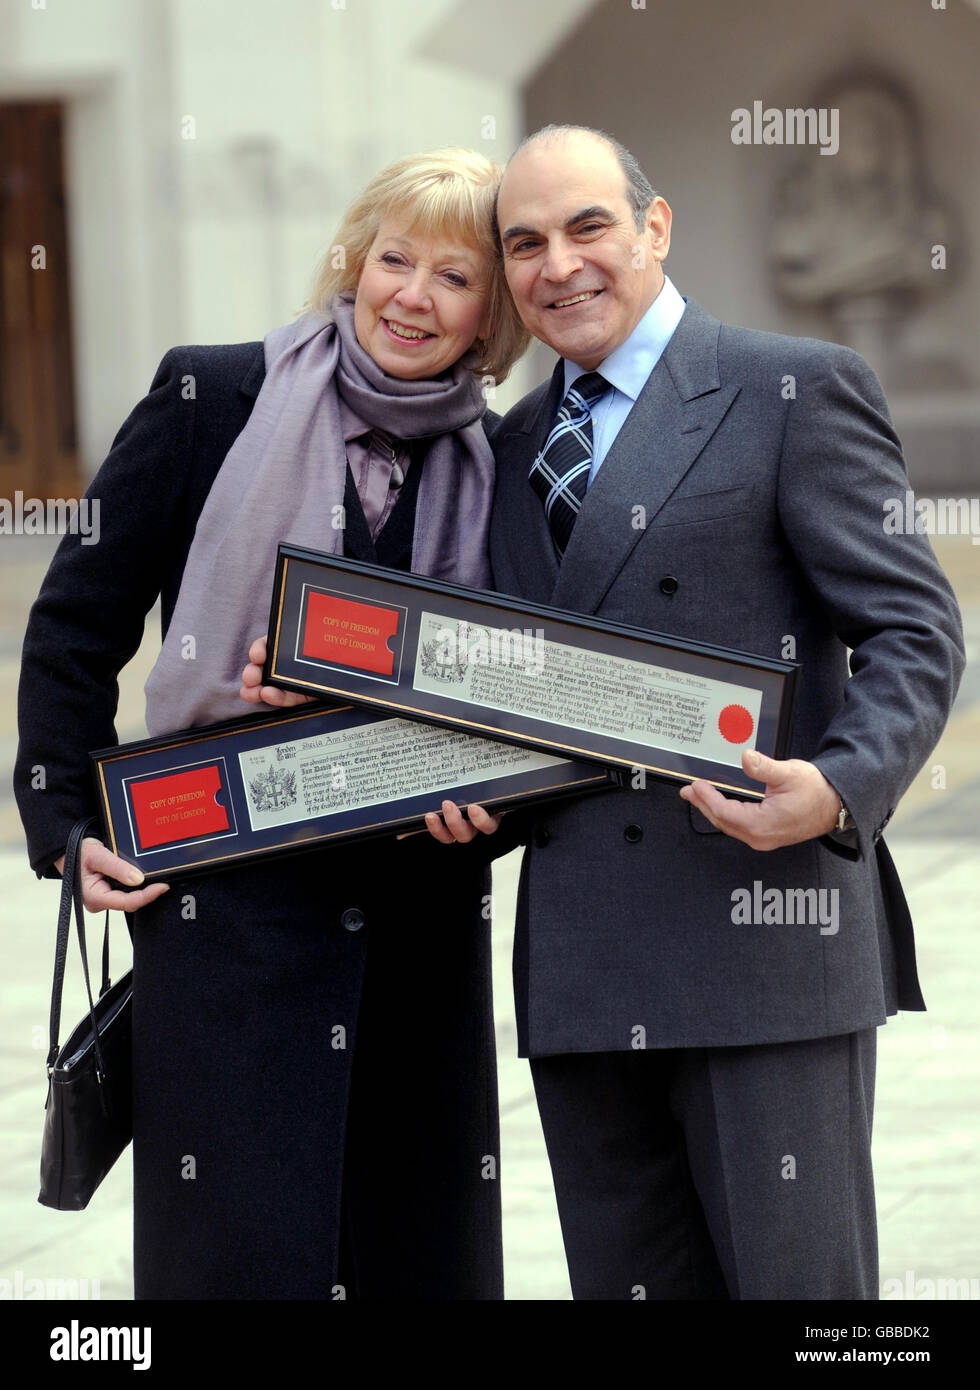 Actor David Suchet receives the Freedom of the City of London with his wife, Sheila, at the Guildhall in east London. Stock Photo